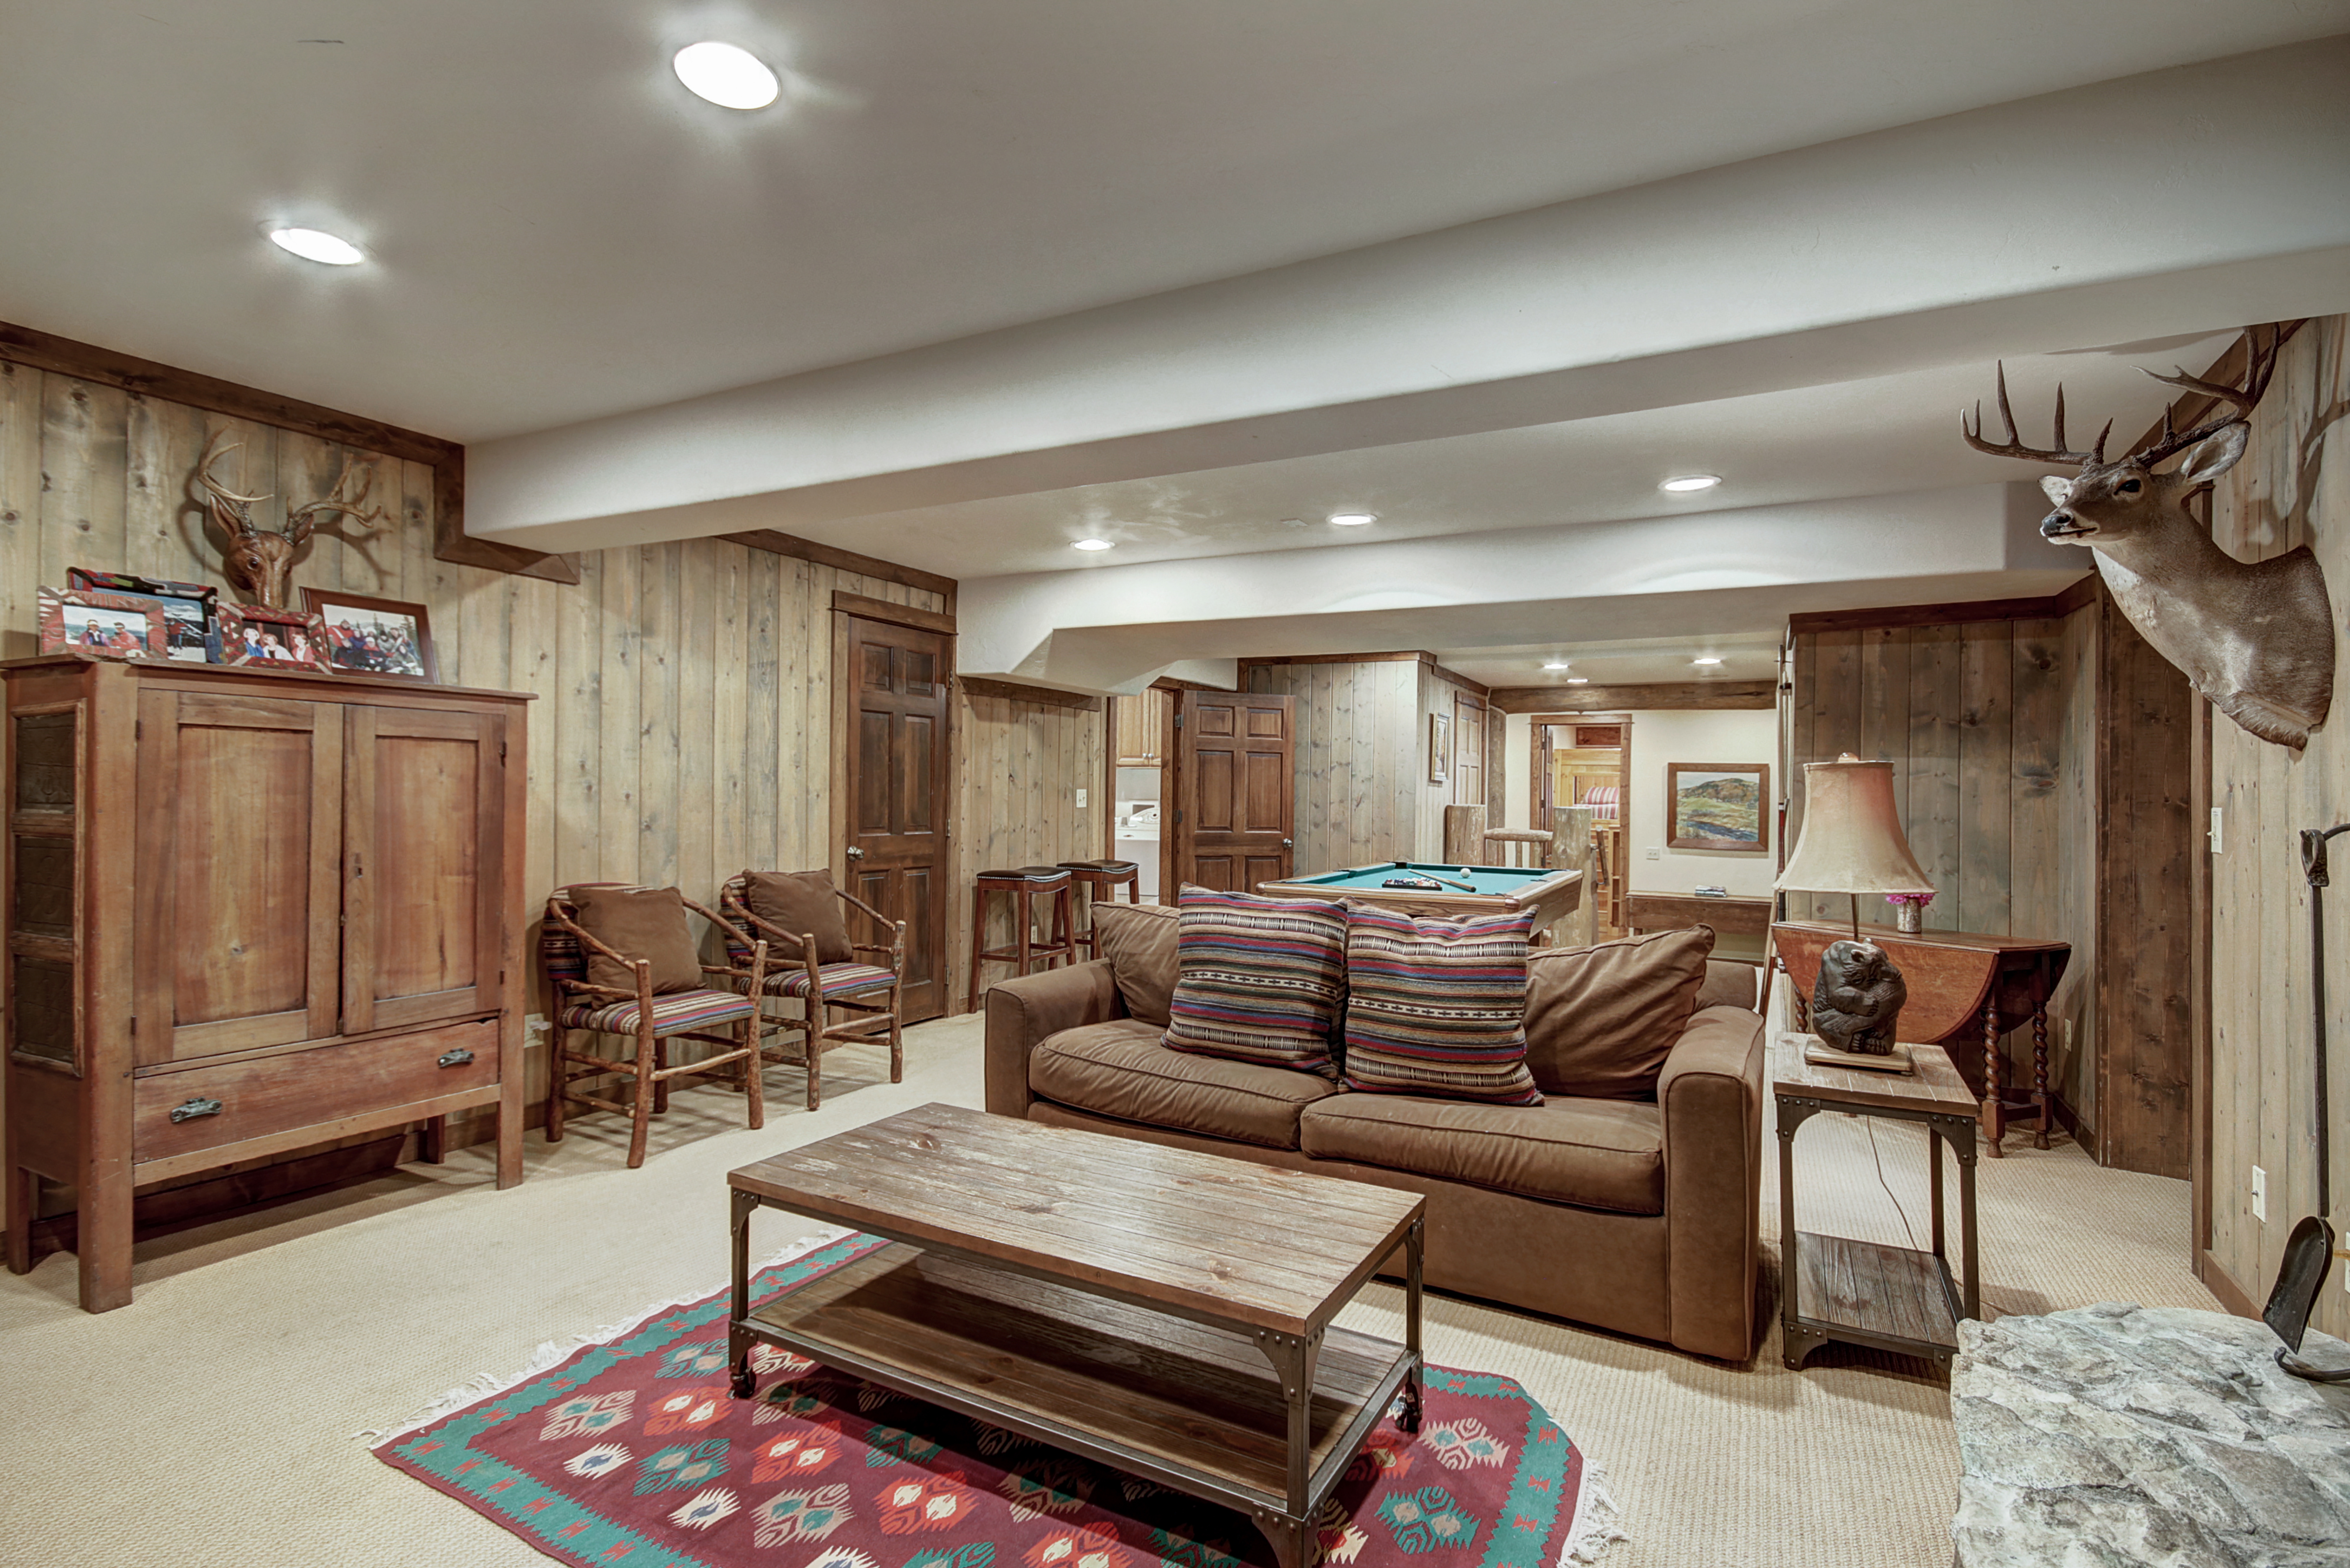 Have a fun night playing pool, watching the latest game, and relaxing - Bear Lodge Breckenridge Vacation Rental